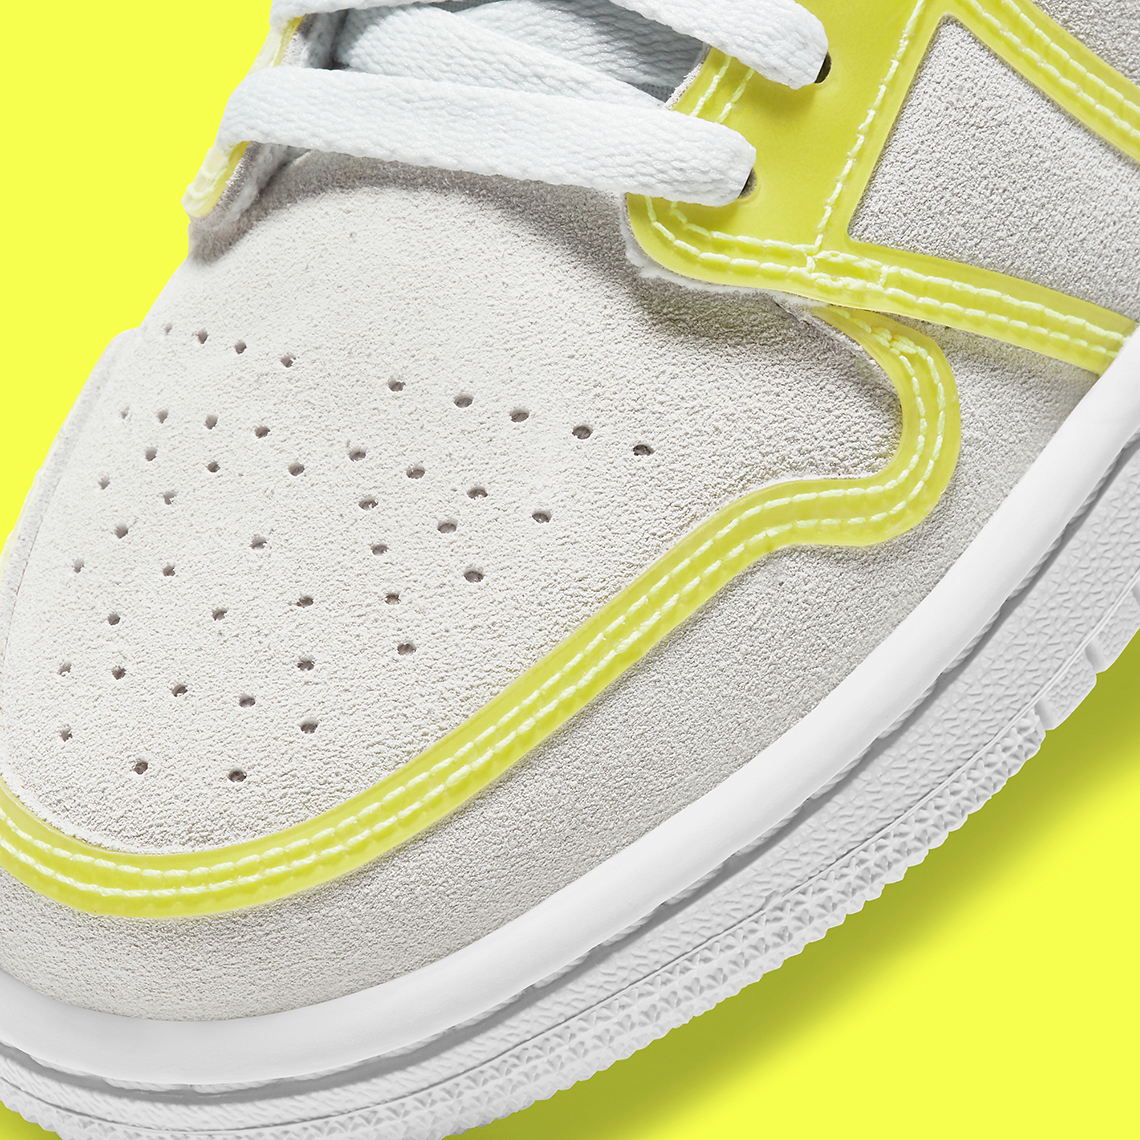 Air Jordan 1 Mid Pairs Off-White Suede And Opti Yellow Cut-Out Overlays -  SneakerNews.com